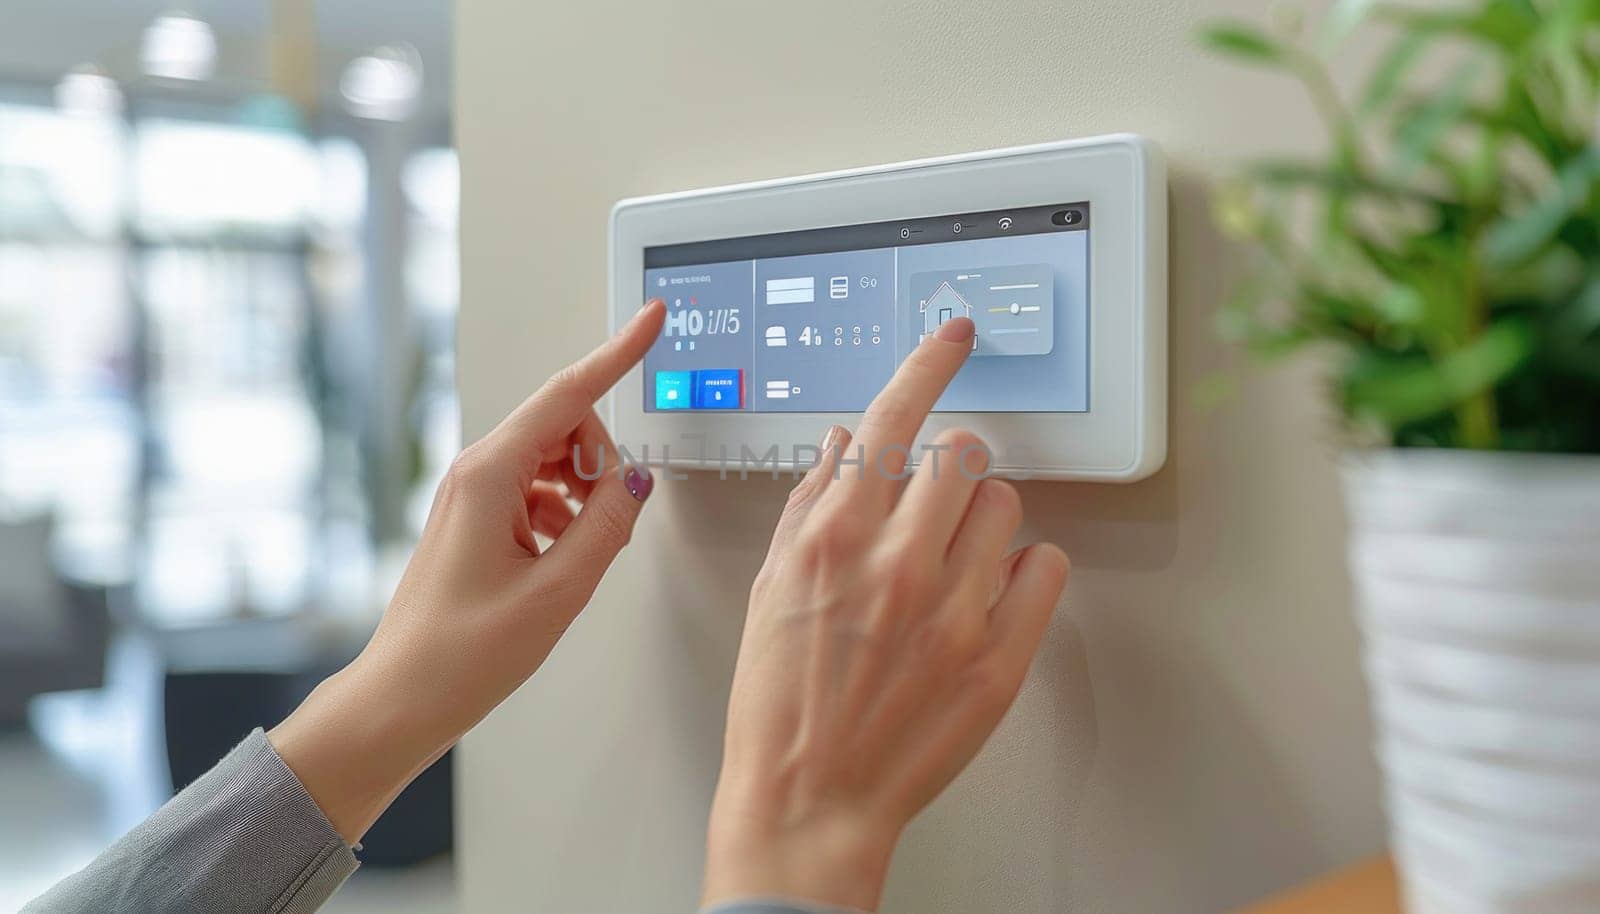 A woman uses her finger to press a button on a security system, interacting with the display device